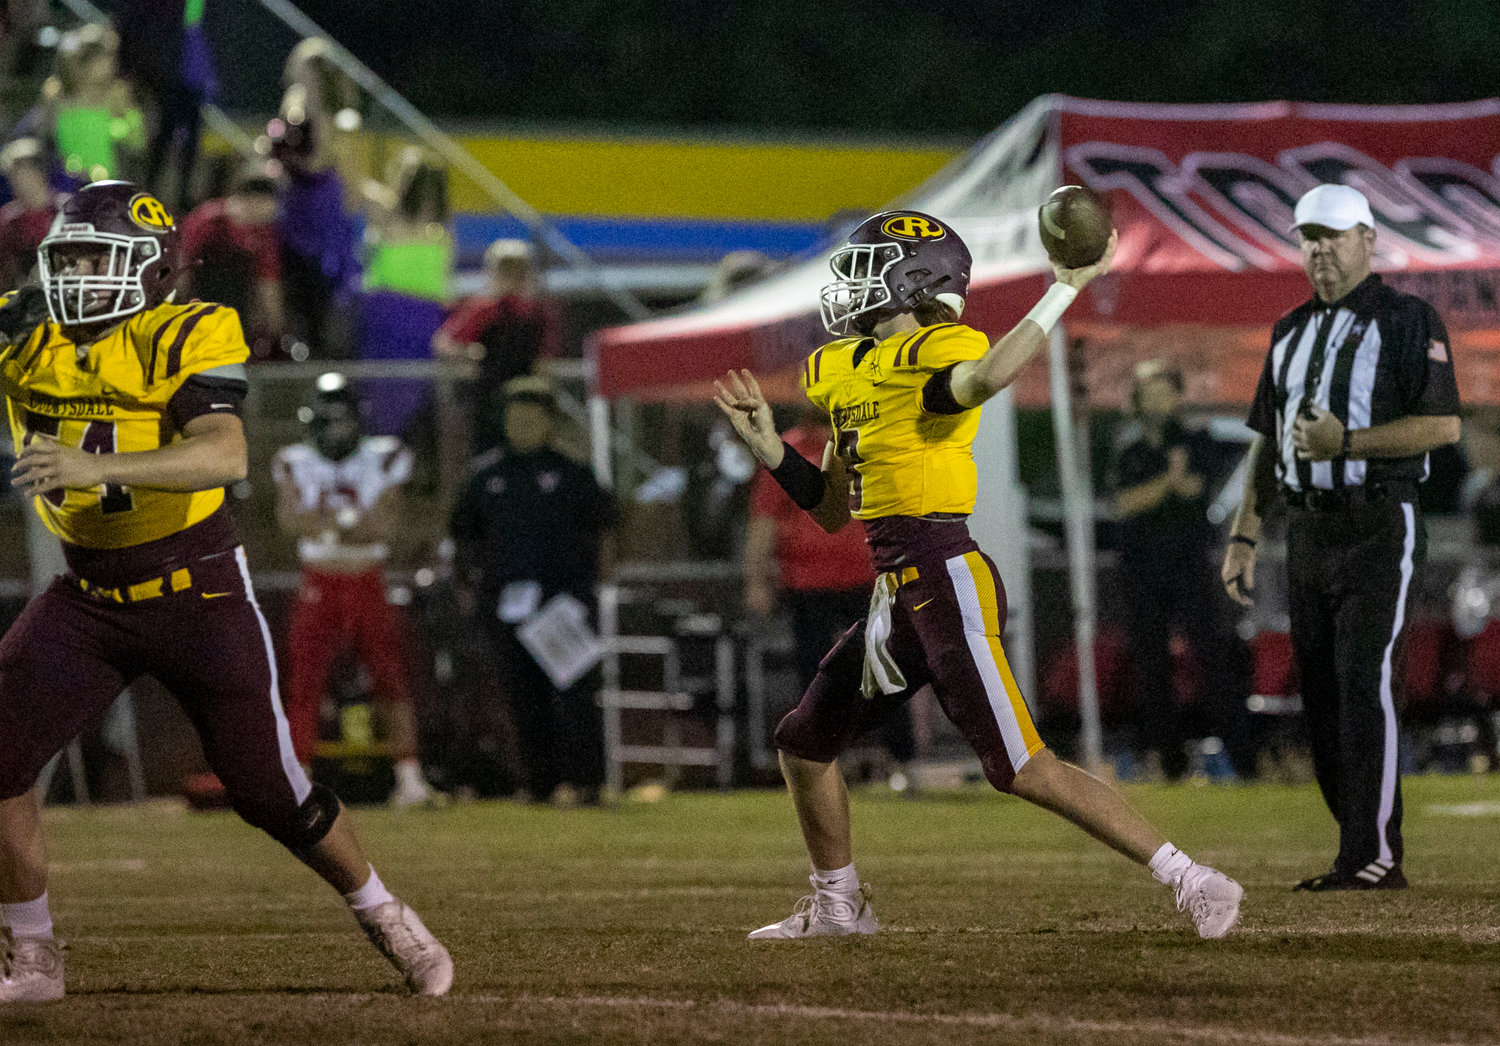 Robertsdale’s Hunter Harvison fires a throw during the Golden Bears’ Class 6A Region 1 contest against the Spanish Fort Toros at J.D. Sellars Stadium Oct. 14. Harvison threw for a pair of touchdowns to help Robertsdale collect 125 points on the season.